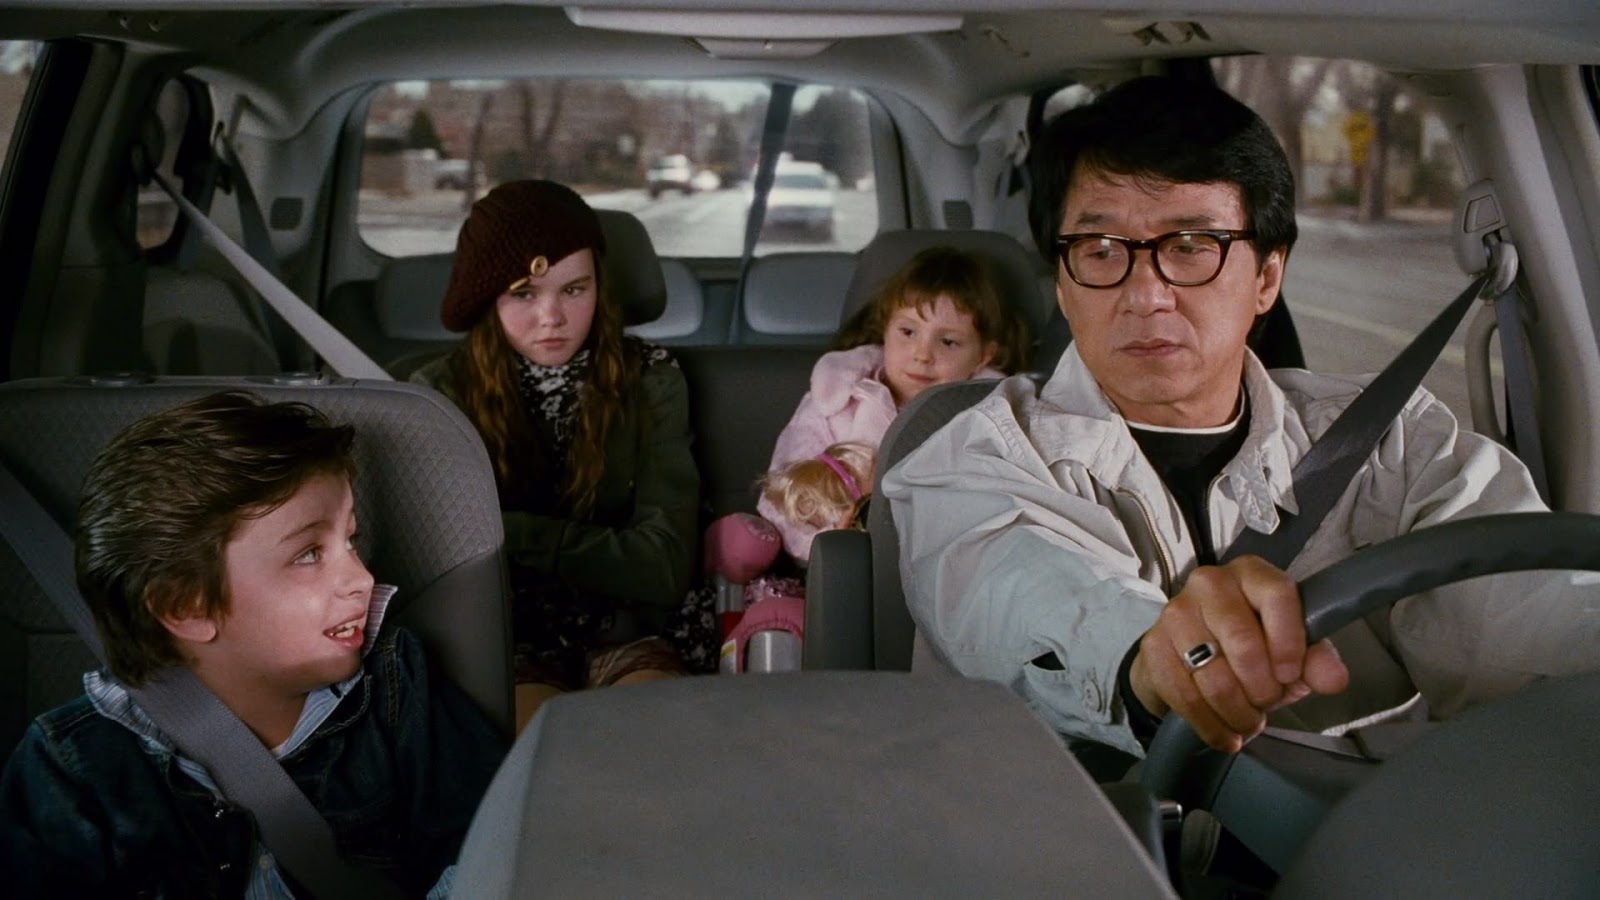 Jackie Chan and his young charges Will Shadley, Madeline Carroll and Alina Foley in The Spy Next Door (2010)